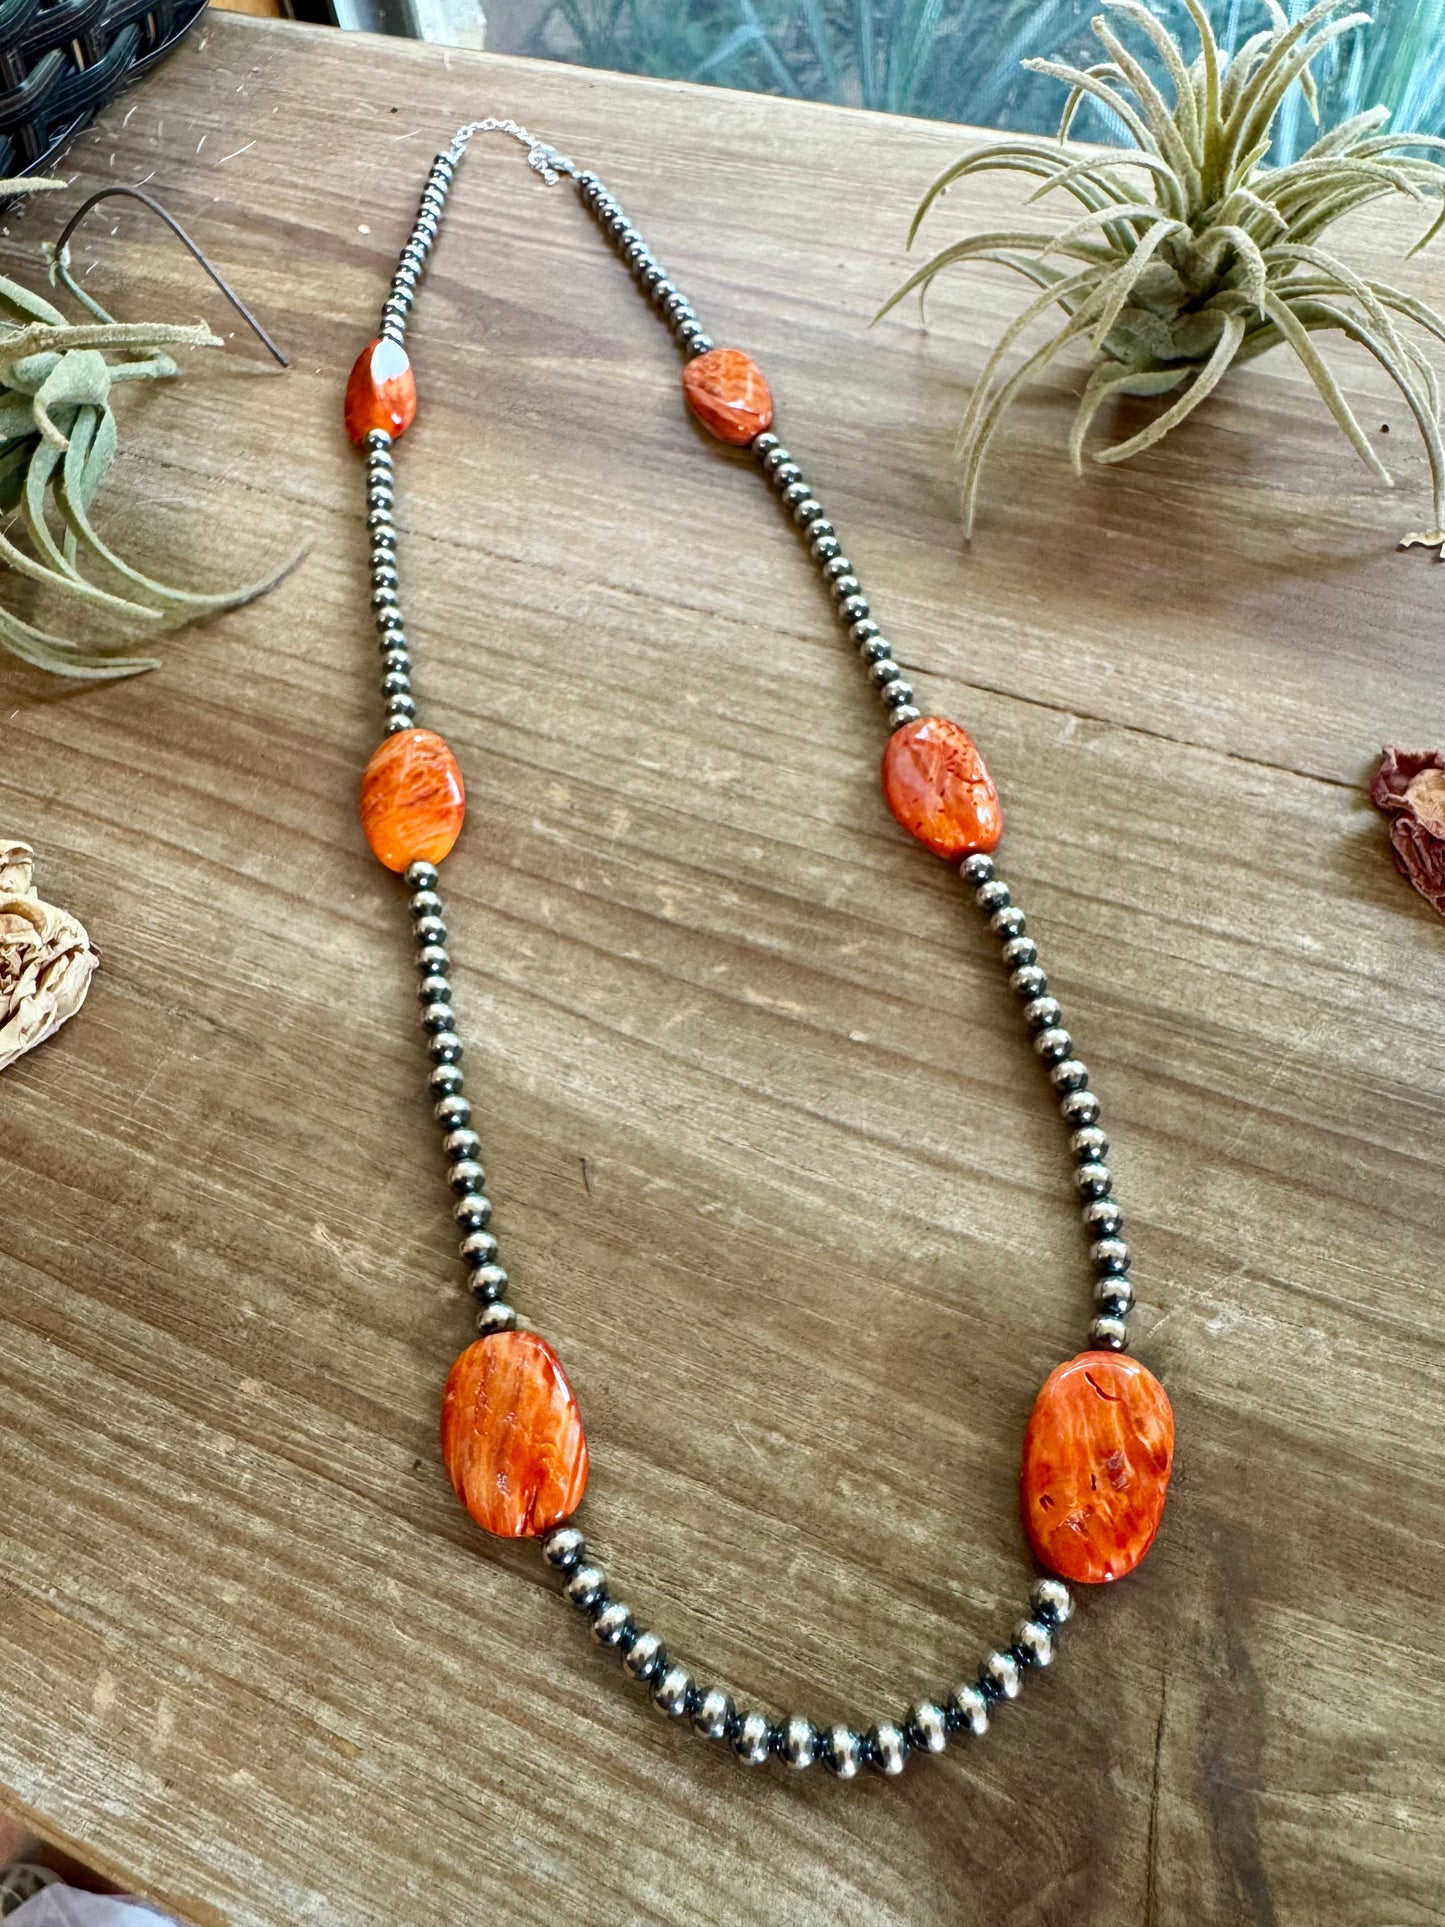 24 inch sterling silver pearls necklace with orange spiny